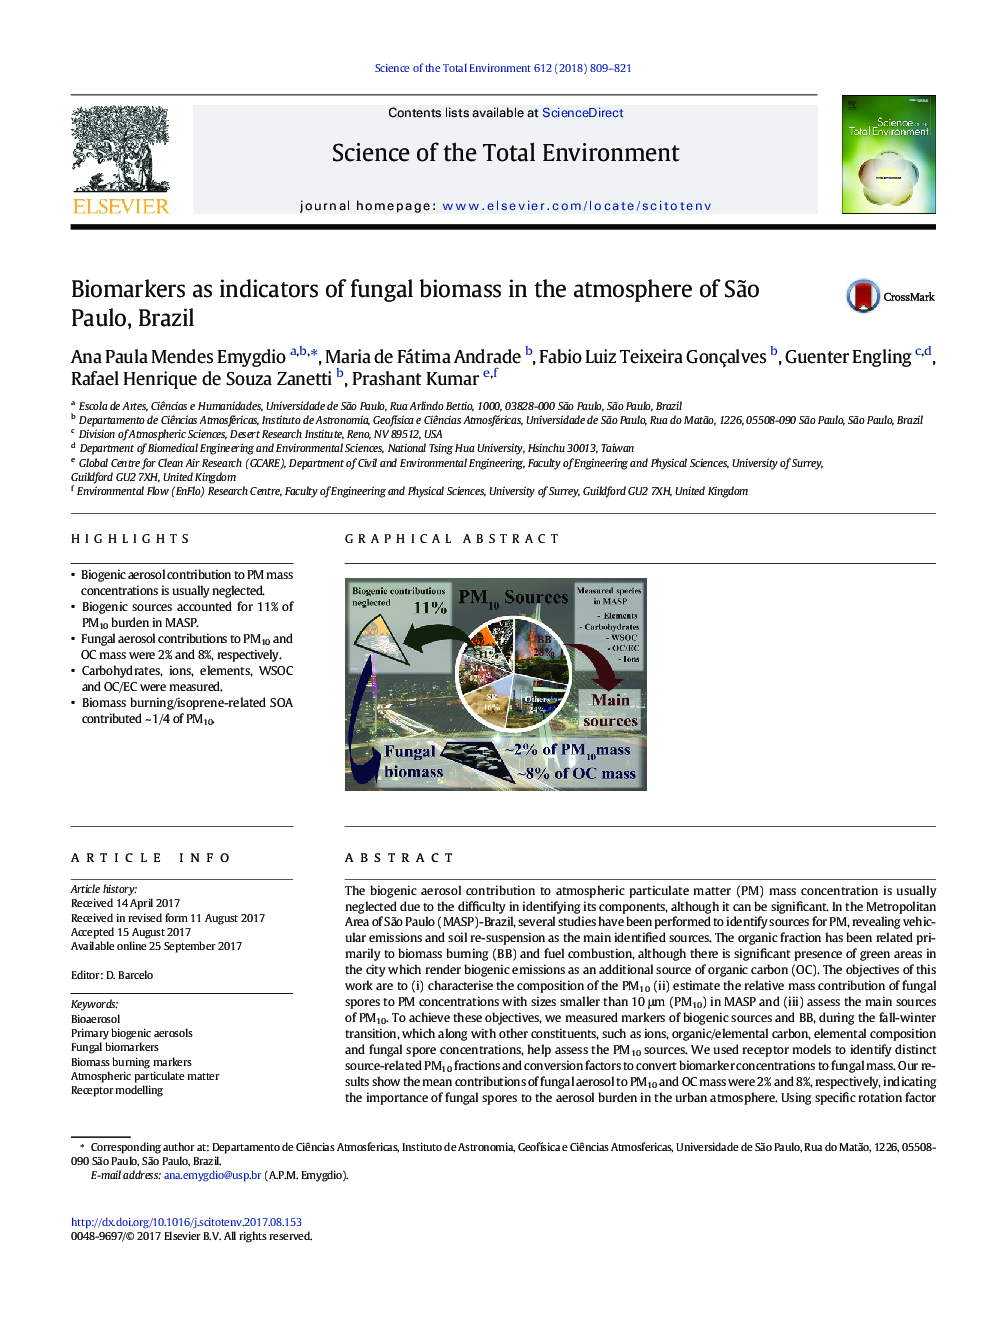 Biomarkers as indicators of fungal biomass in the atmosphere of SÃ£o Paulo, Brazil